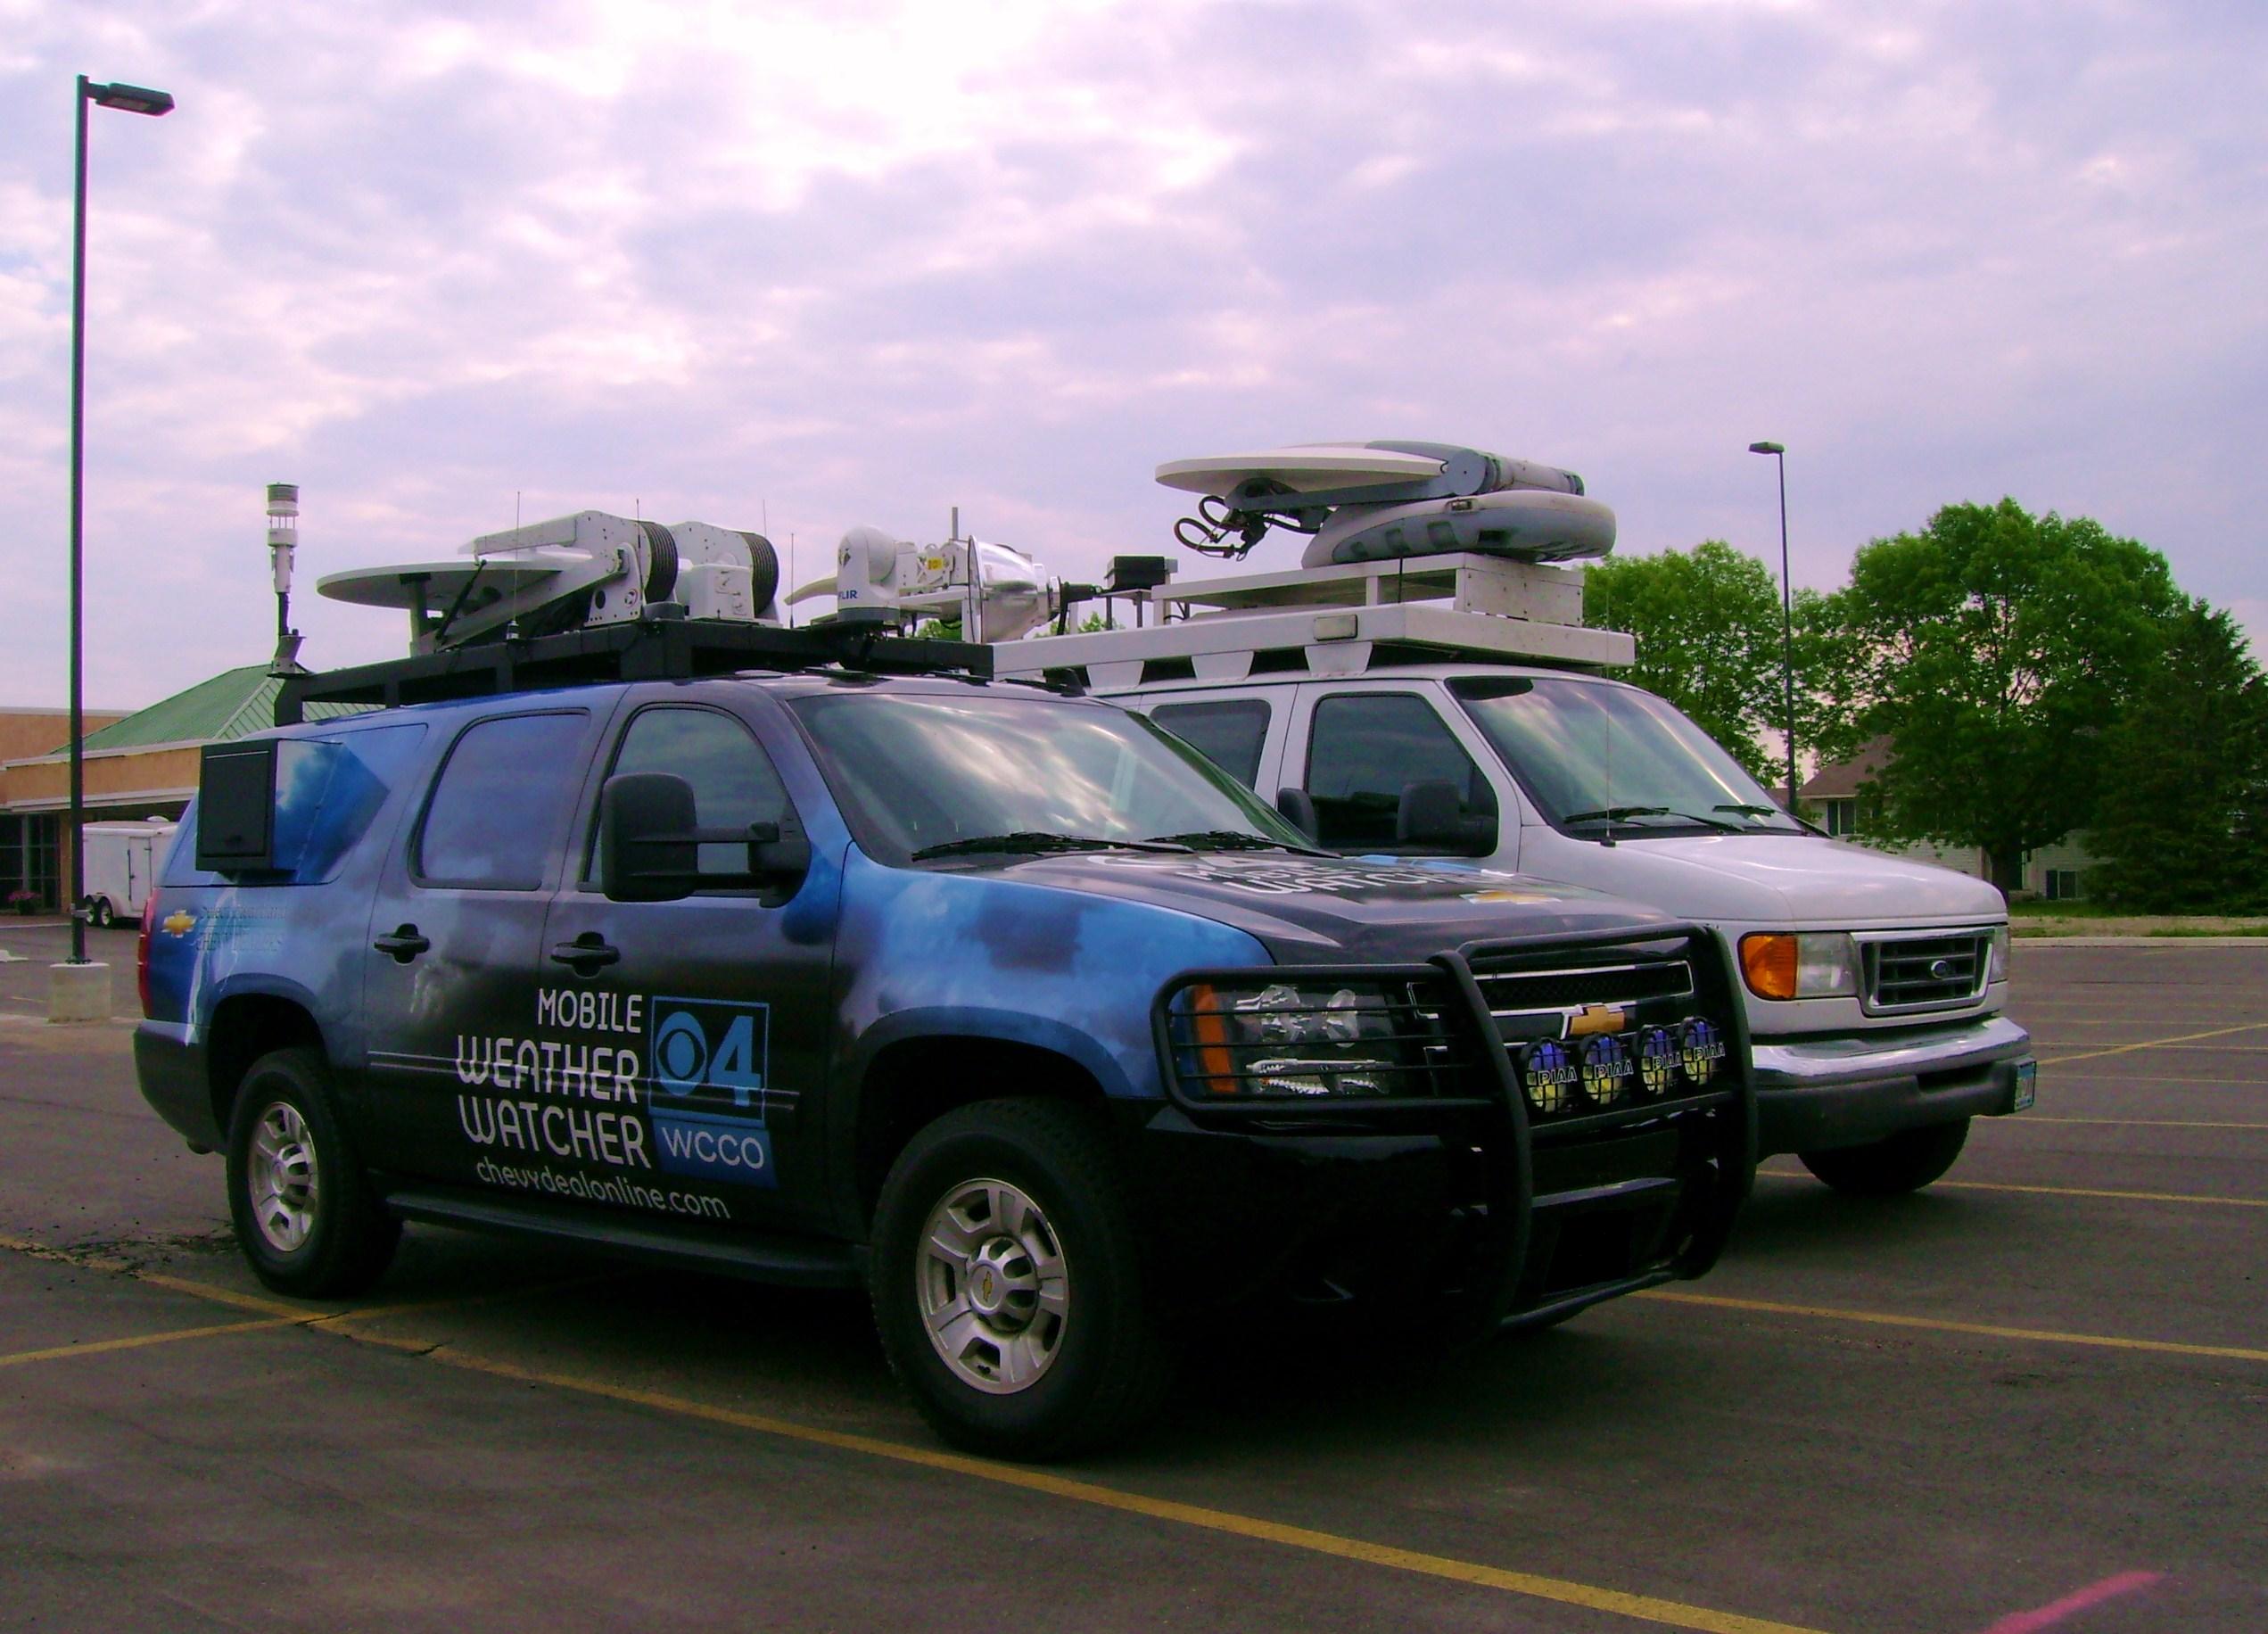 The WCCO Mobil Weather Watcher & Broudcast Van with Frank V. & Chris S. for 